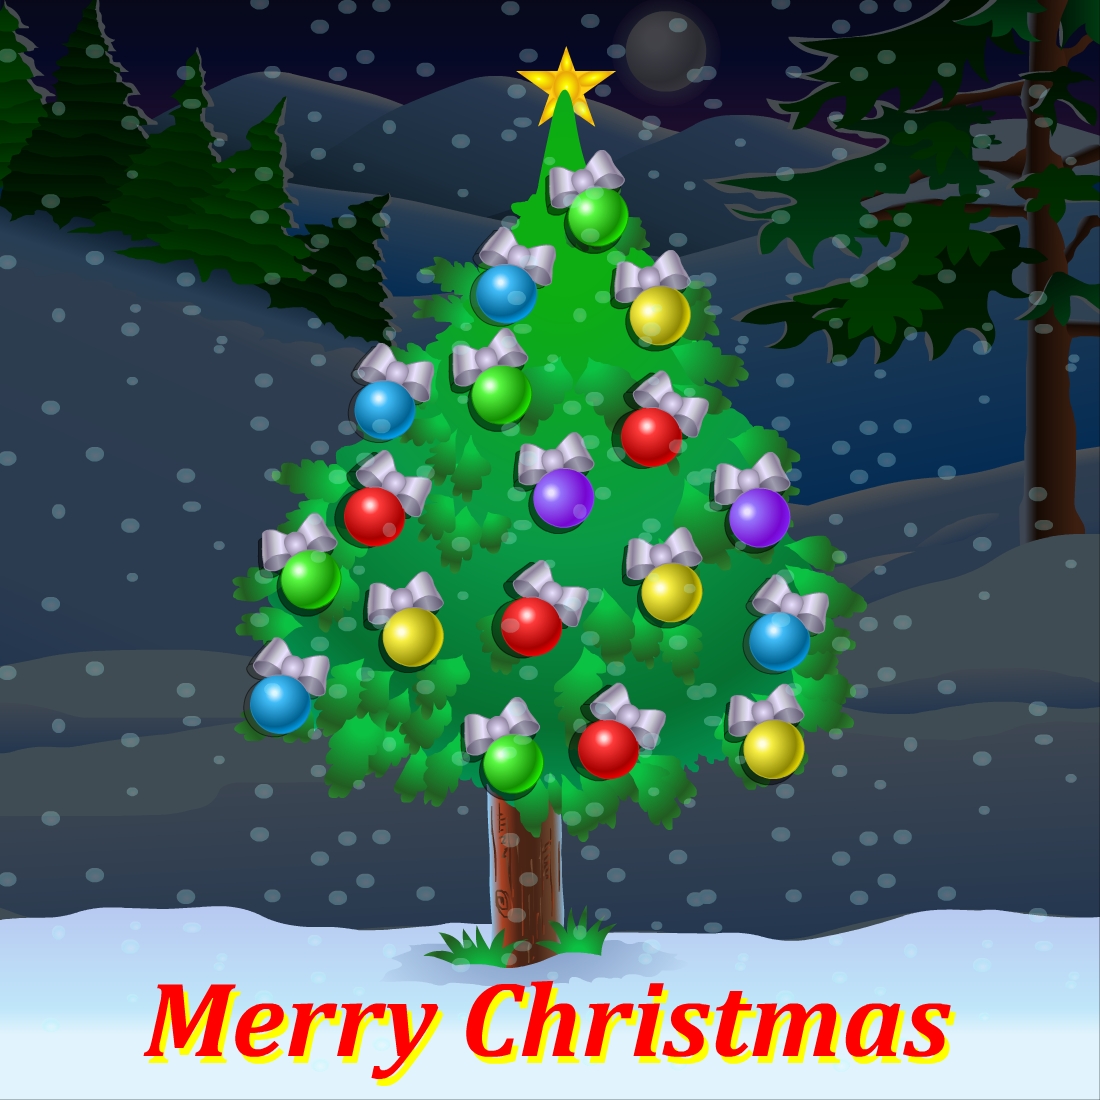 Merry Christmas Tree with Balls Illustrations preview image.